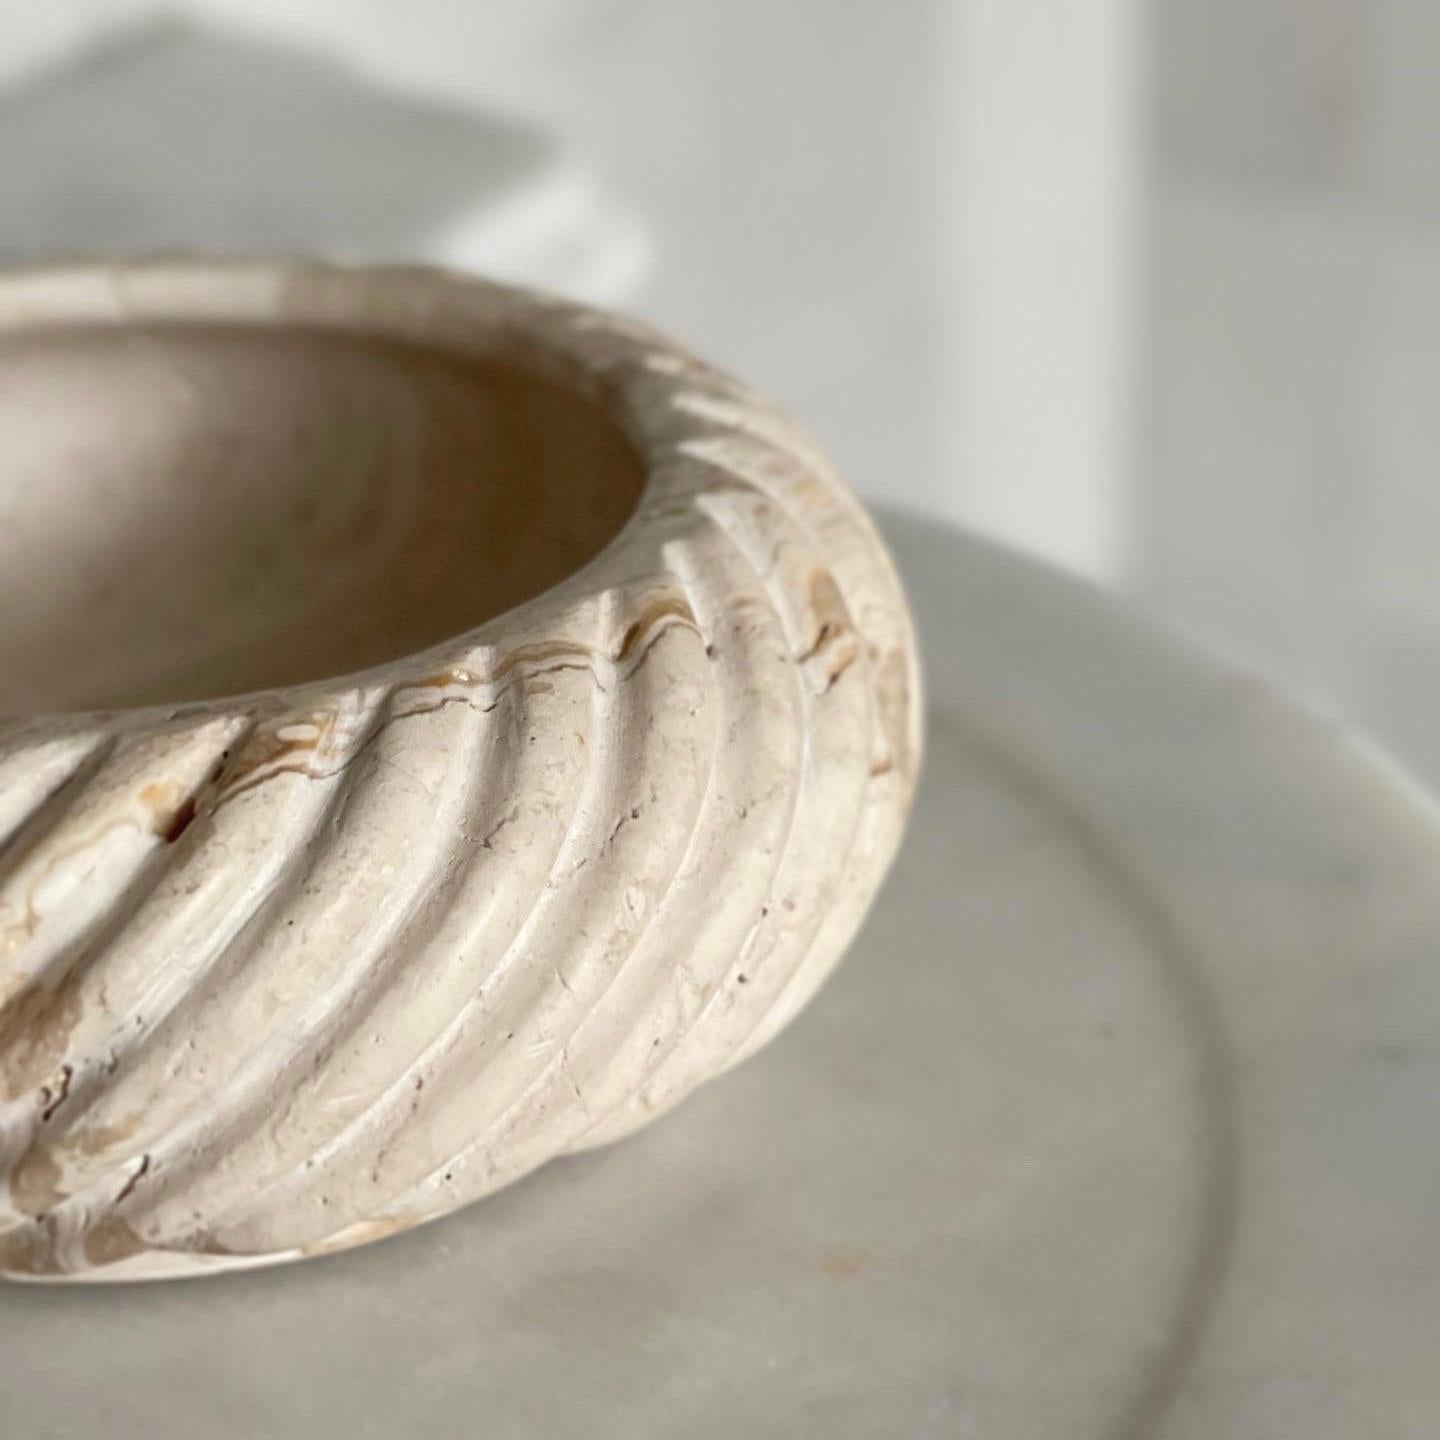 A limited production, functional object d'art exclusively produced by Anastasio Home.

The Cruller Bowl is a heavy set, nine-inch round bowl cut from a single piece of solid stone, hand-finished in a twisted rope motif by artisans in a growing